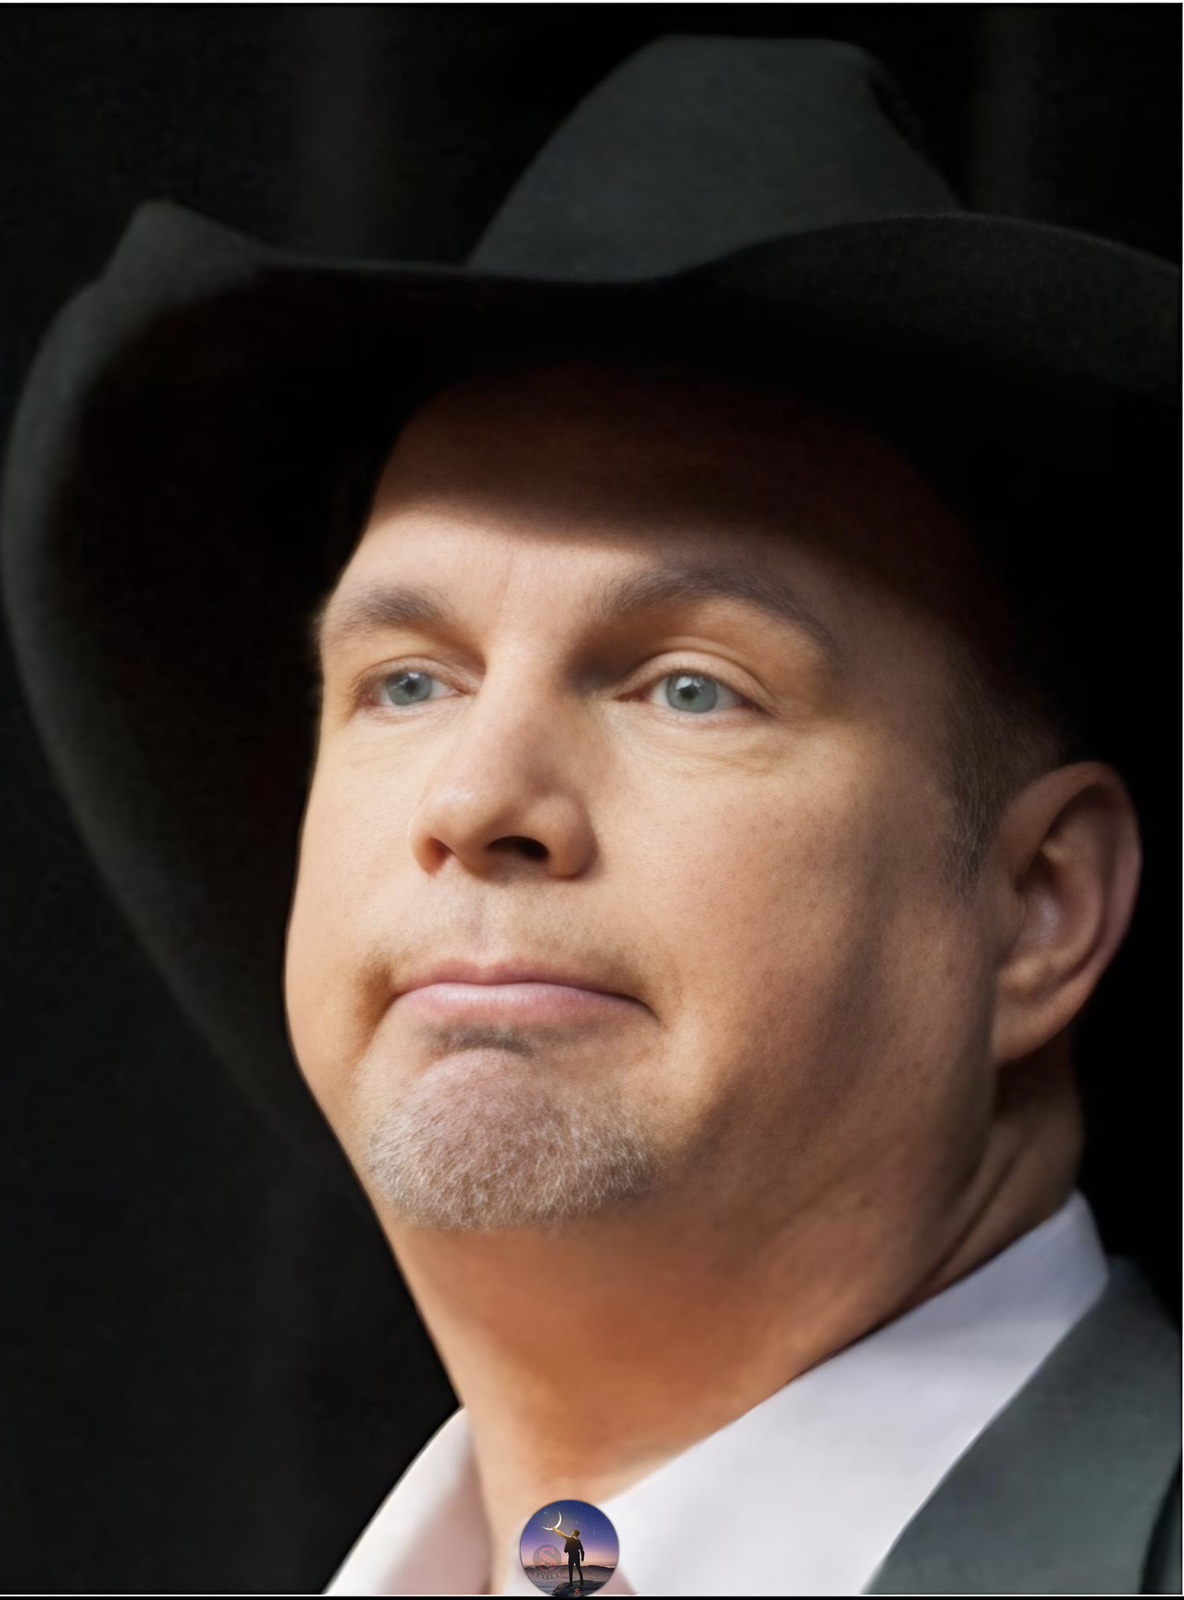 Toby Keith unleashes his thoughts on Garth Brooks in a candid interview.